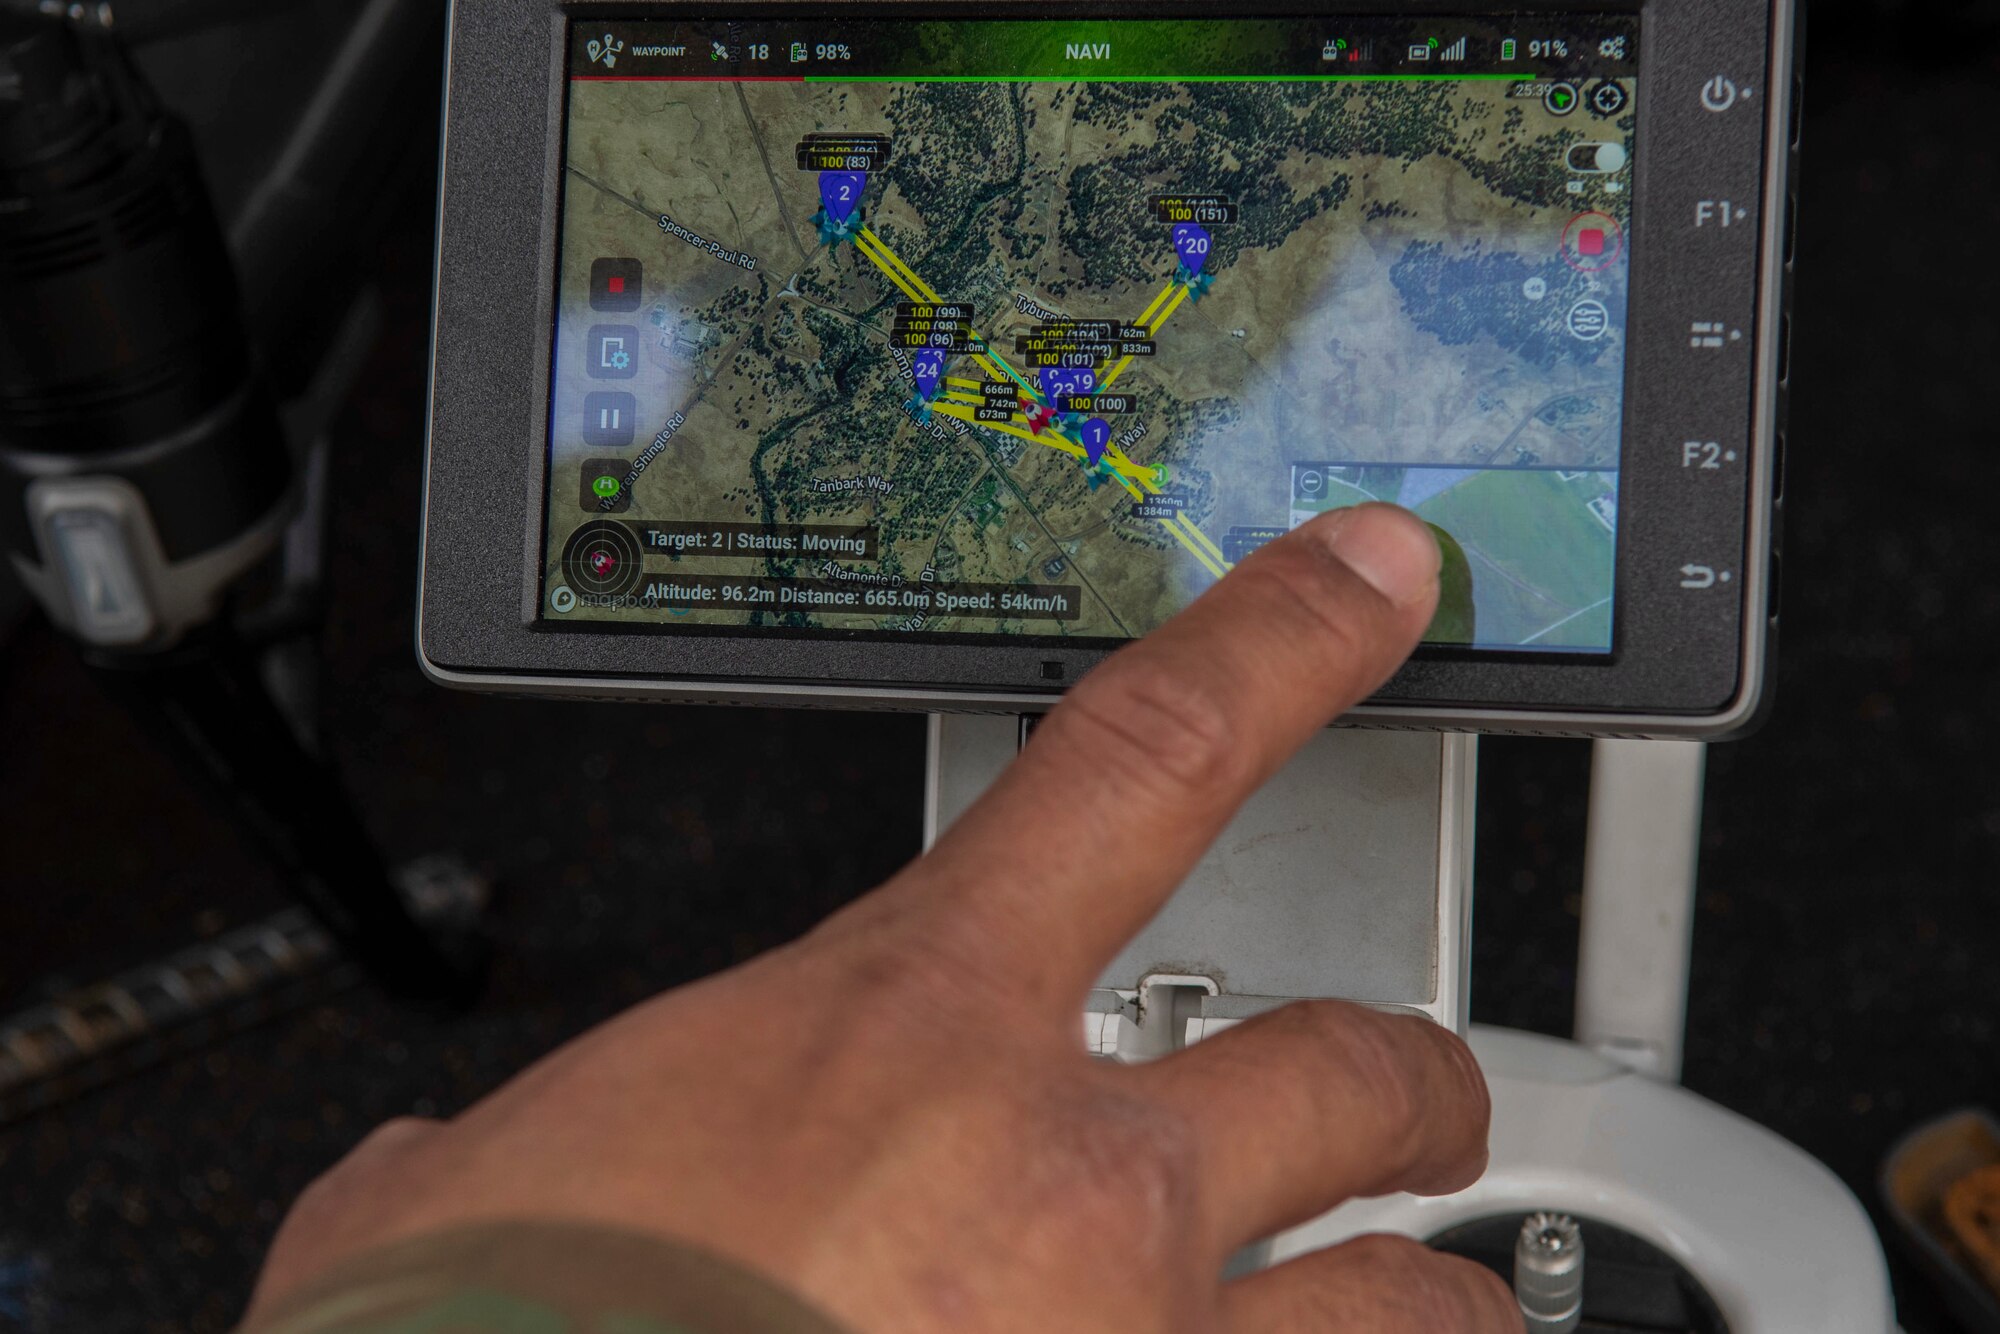 U.S. Air Force Staff Sgt. Staff Sgt. Francis Arnaldo, 9th Security Forces Squadron resource protection NCO in charge, points to Hivemapper drone imagery taken at the perimeter of Beale Air Force Base, California, April 12, 2019. Beale is currently the first base to beta-test the Hivemapper program, a drone capability that records and senses change detection. (U.S. Air Force photo by Tech. Sgt. Veronica Montes)